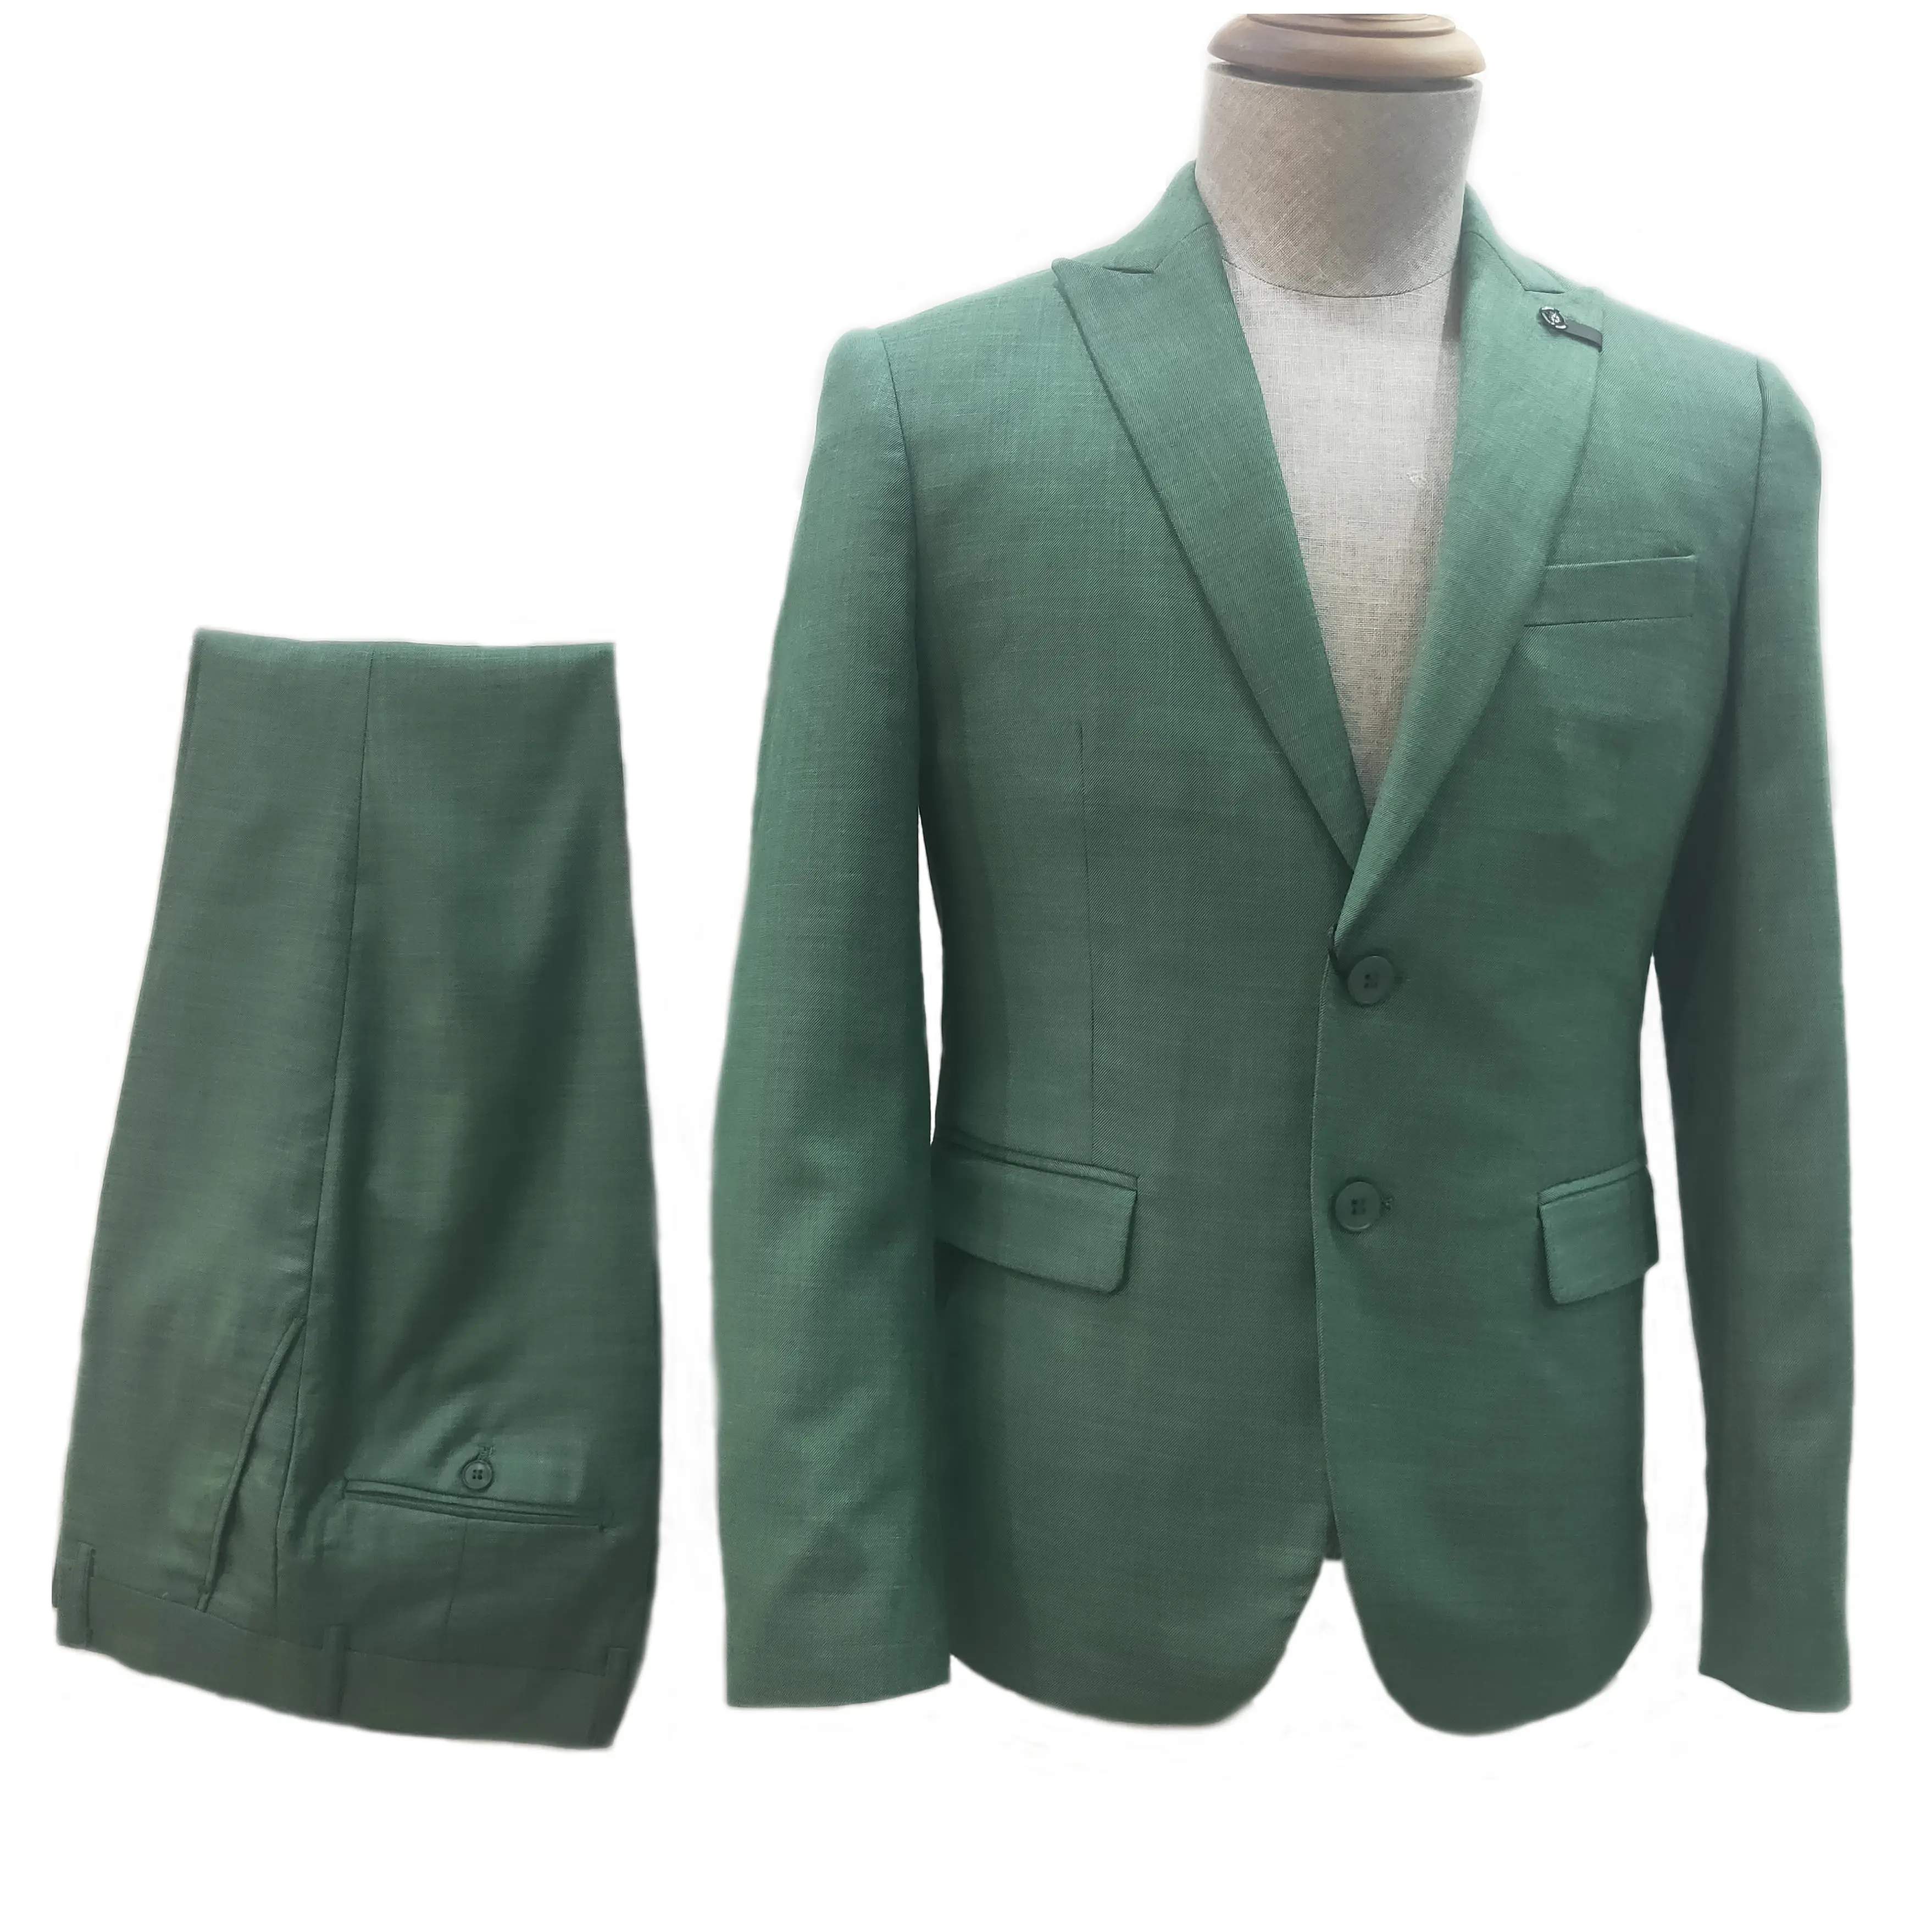 China factory men's korean style suit jacket korean style single-breasted green suit